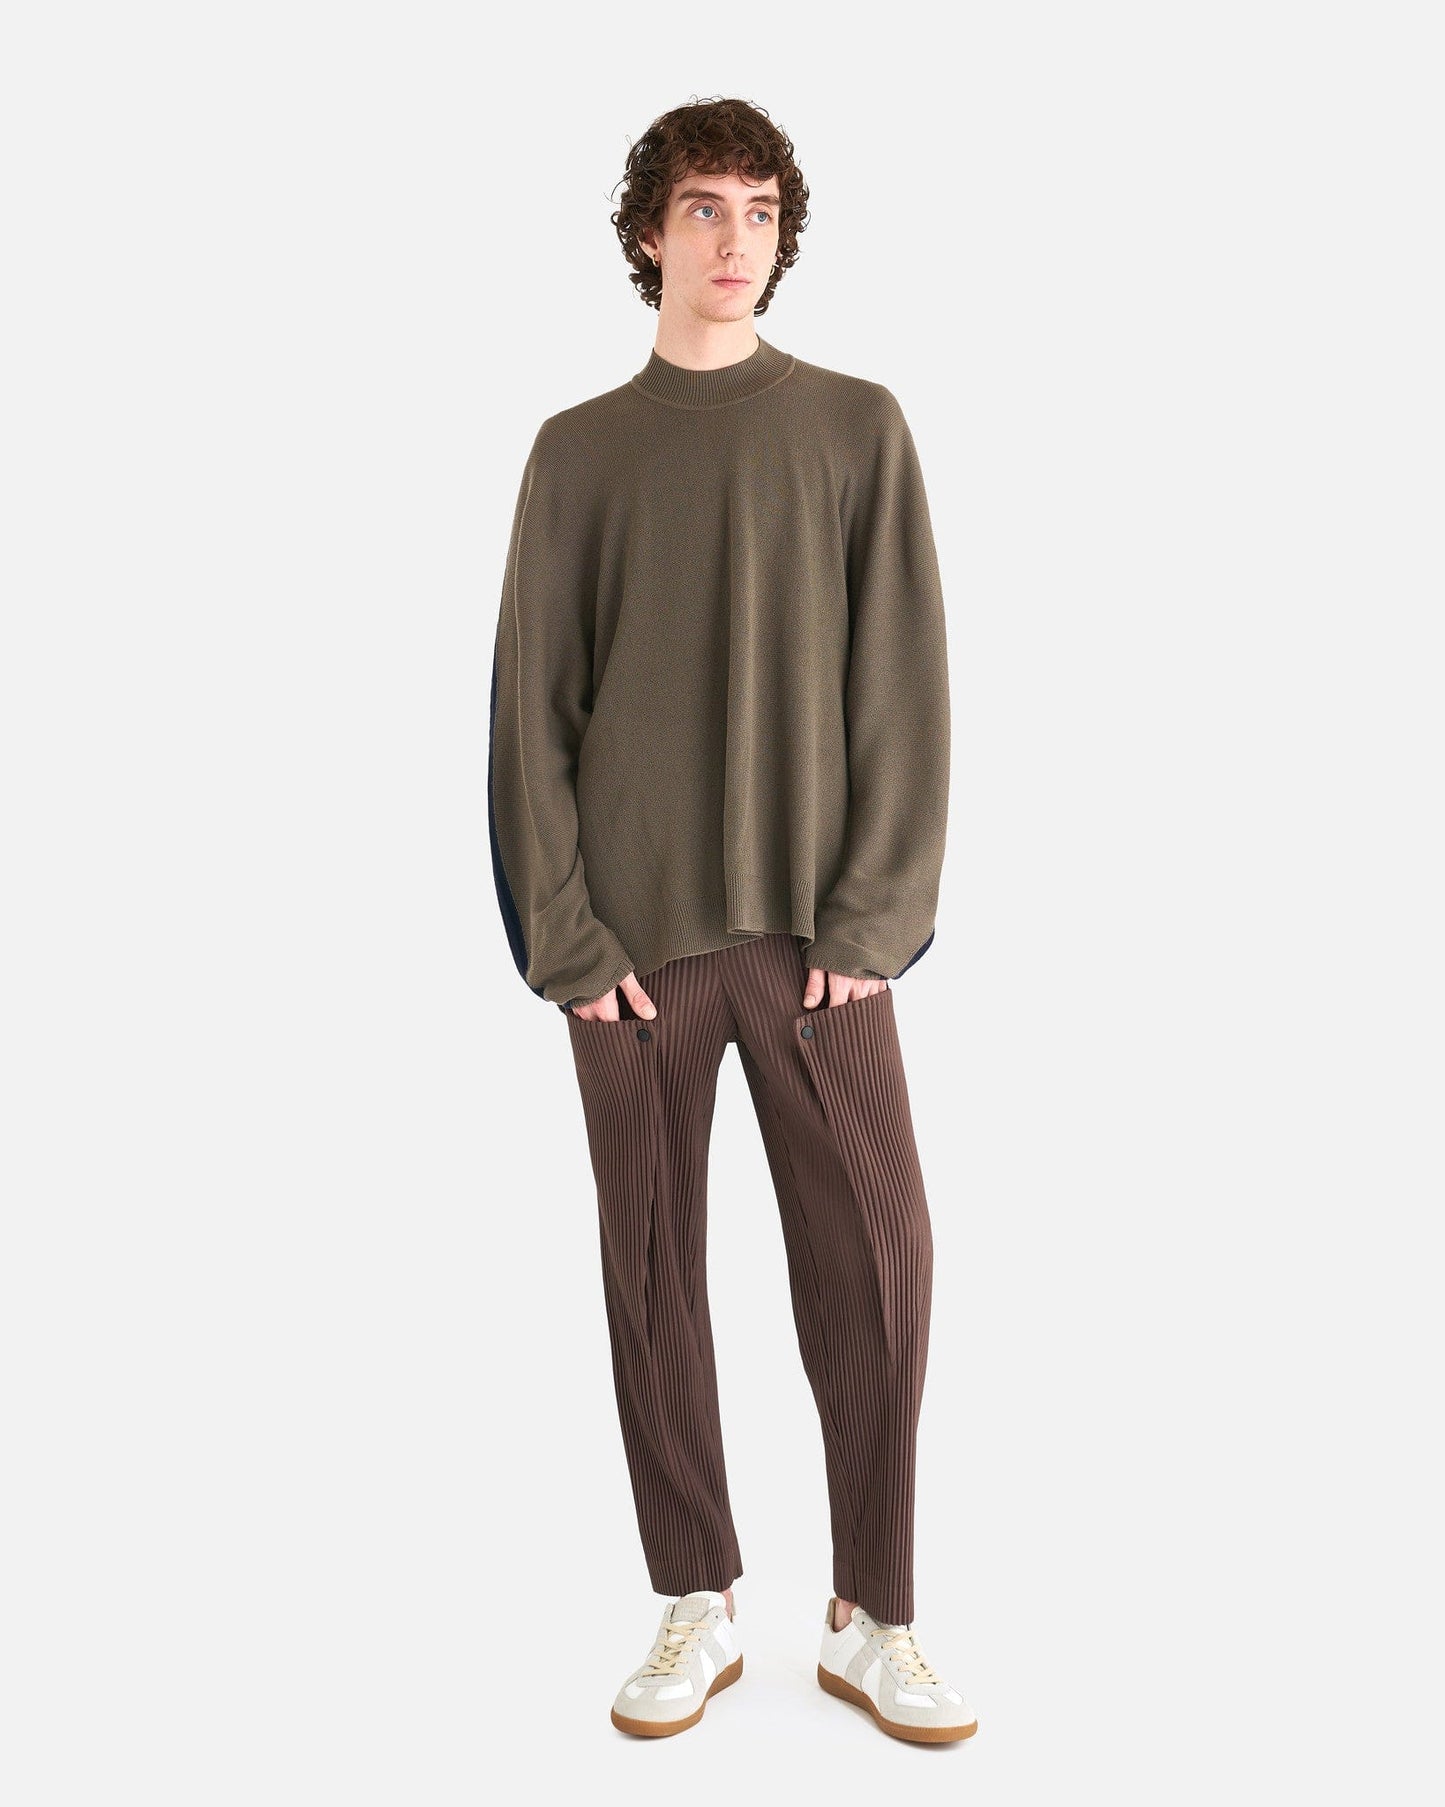 Homme Plissé Issey Miyake Men's Pants Unfold Pleated Trousers in Soil Brown